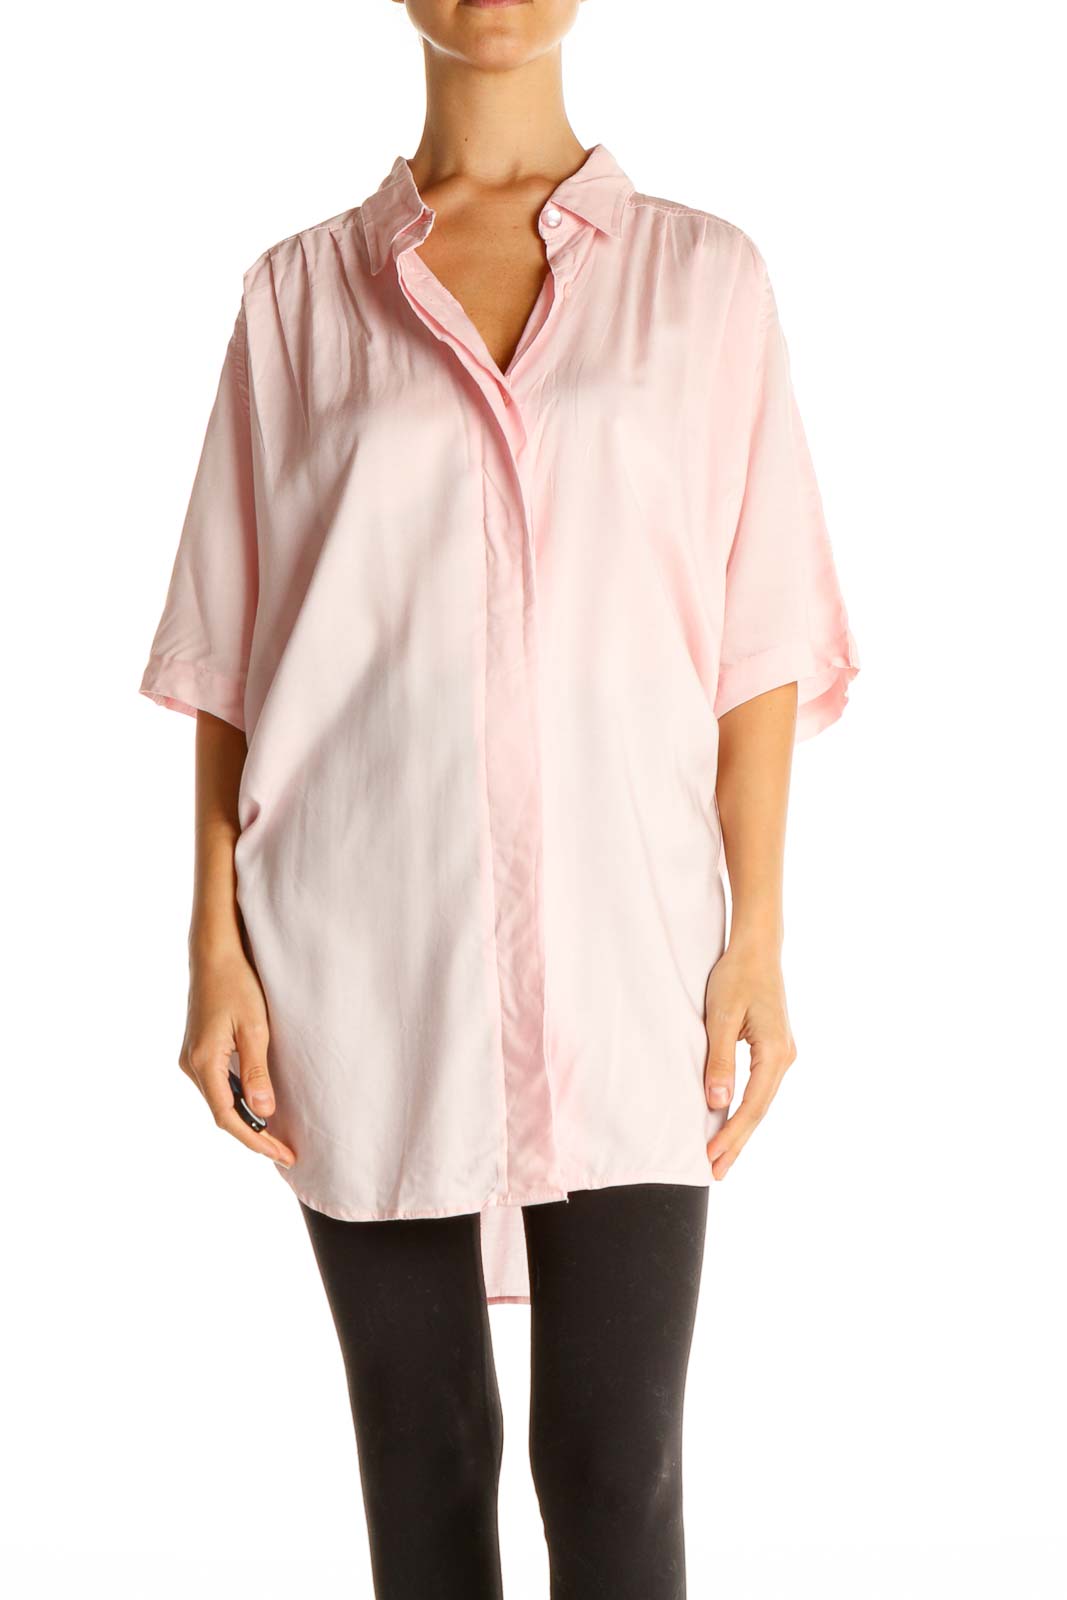 Pink Solid Work Shirt Front